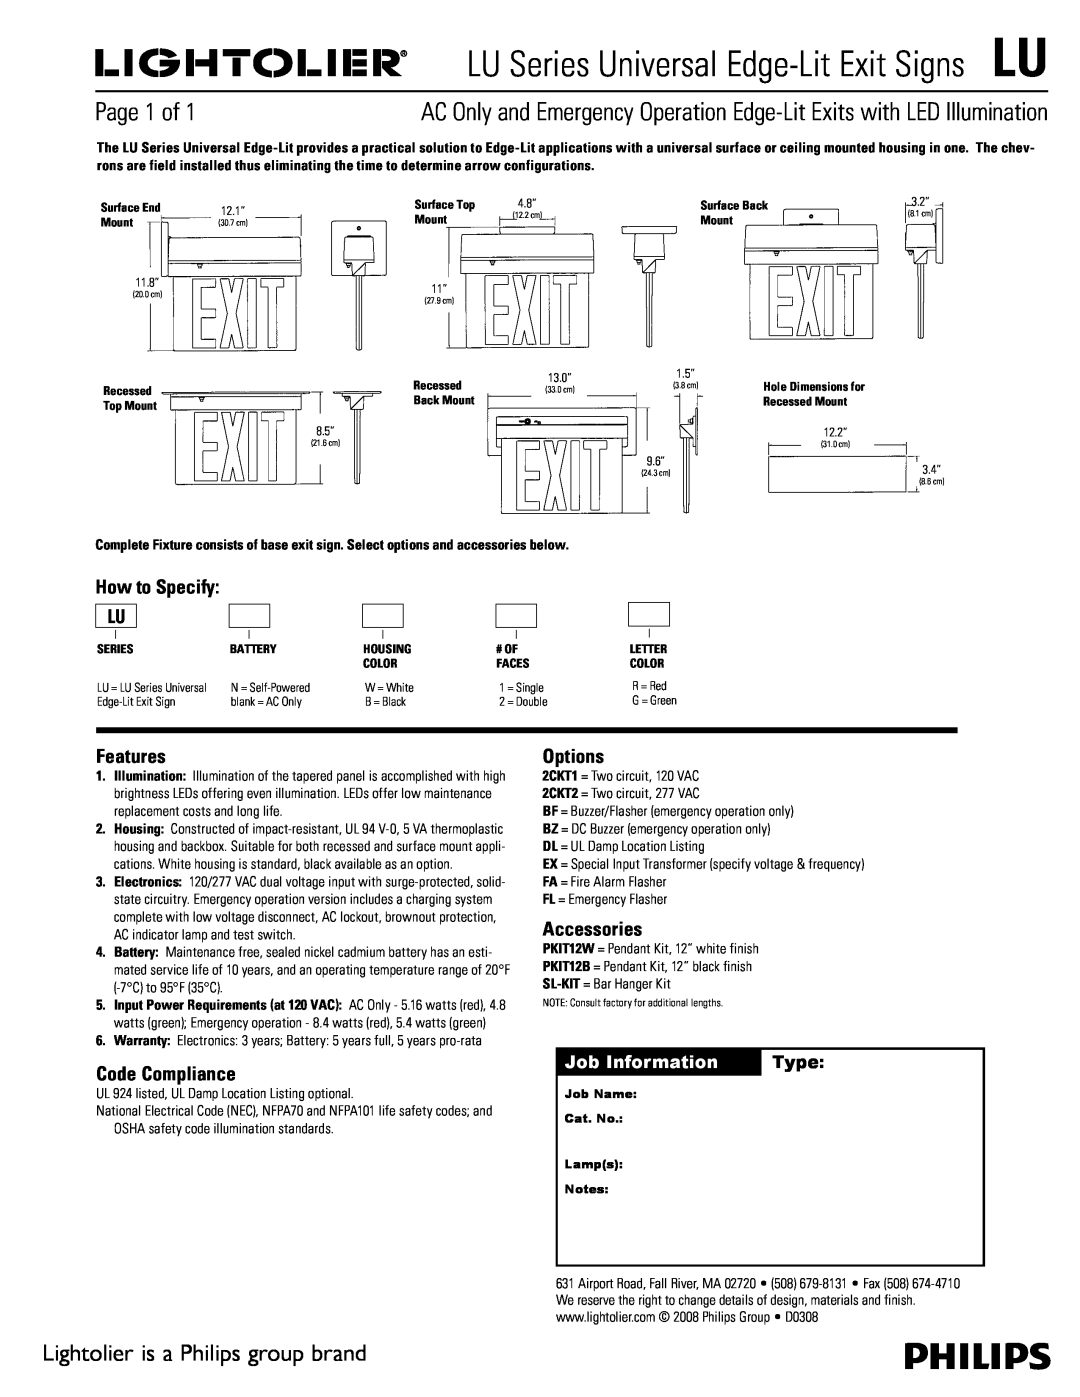 Lightolier warranty LU Series Universal Edge-LitExit SignsLU, Page 1 of, Lightolier is a Philips group brand, Features 